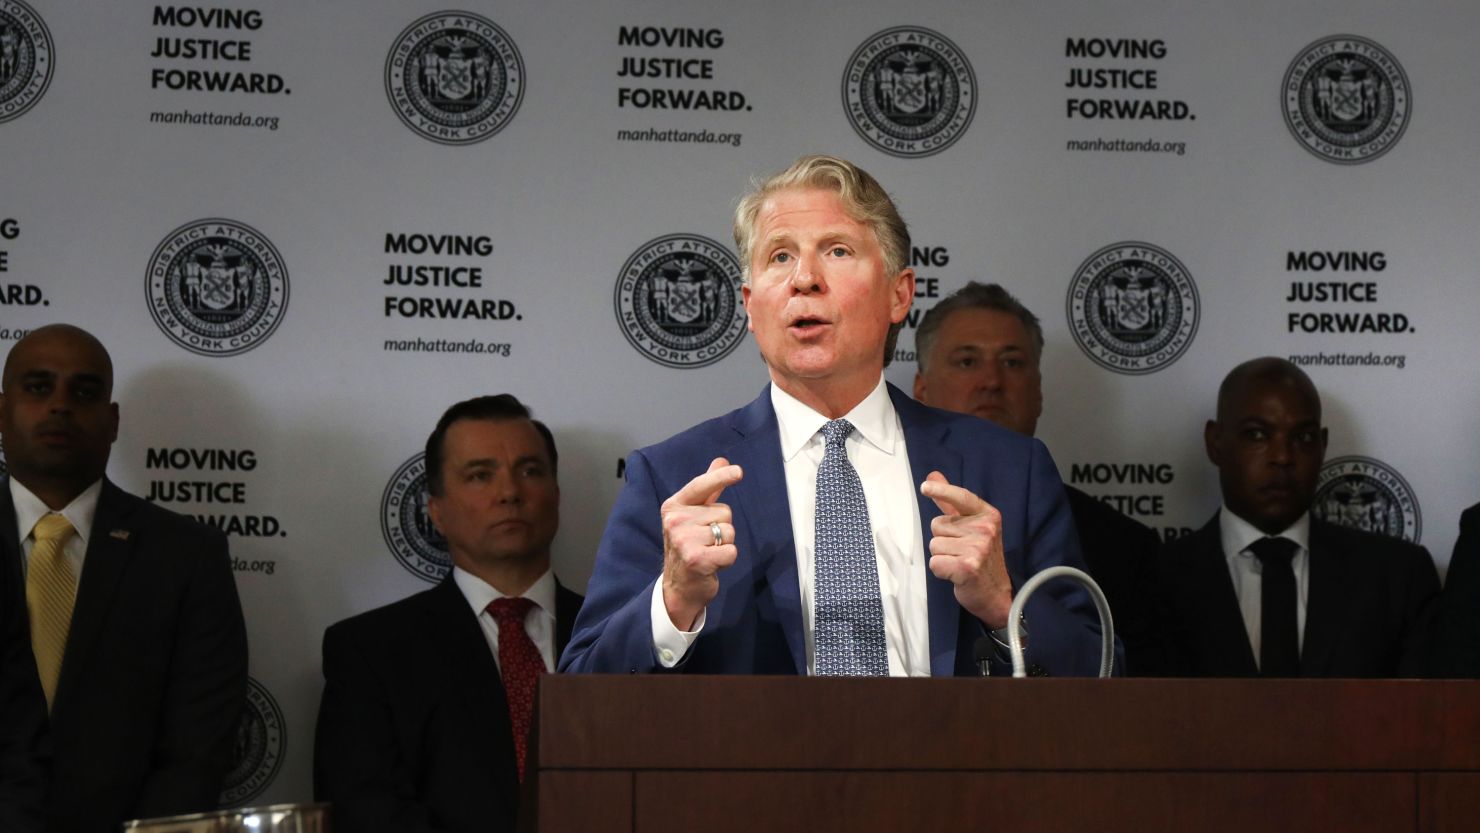 District Attorney Cyrus Vance said will not reopen the thousands of cases handled by Linda Fairstein, the former Chief of the Manhattan DA's Sex Crimes Unit.